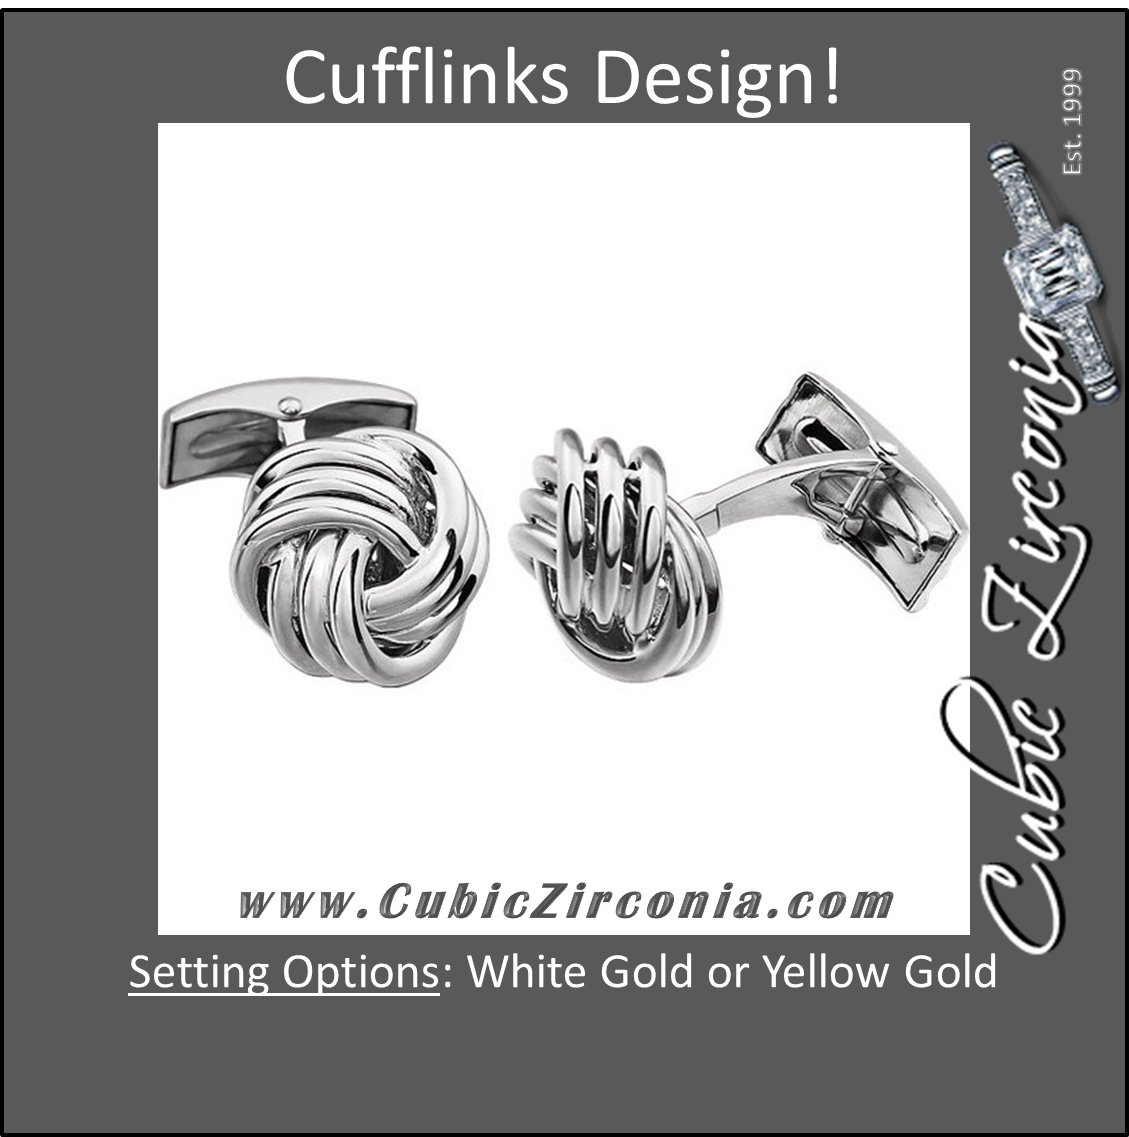 Men's Cufflinks- 14K White or Yellow Gold Thick Knot Design